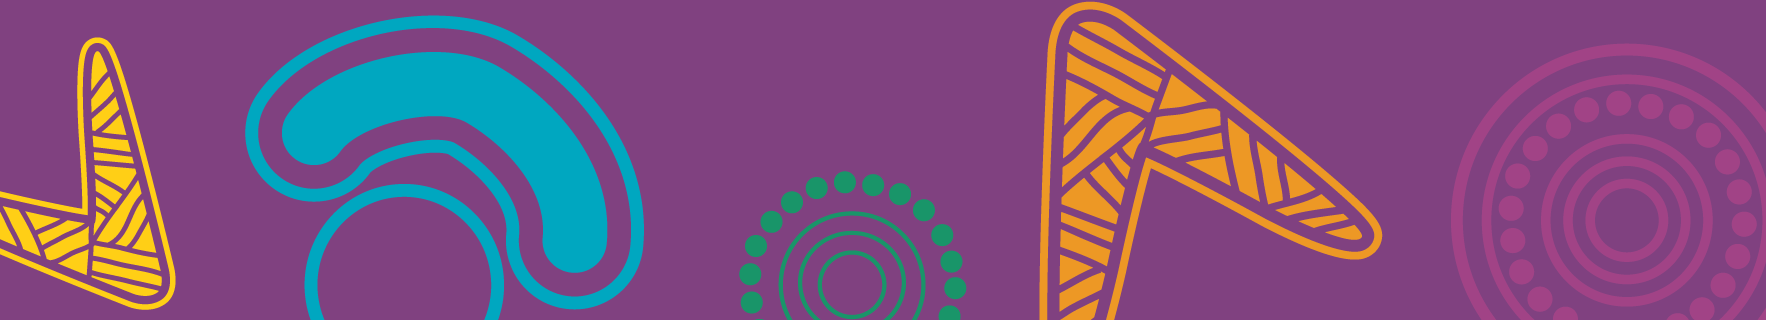 Indigenous mofti pattern artwork for indigenous careers page